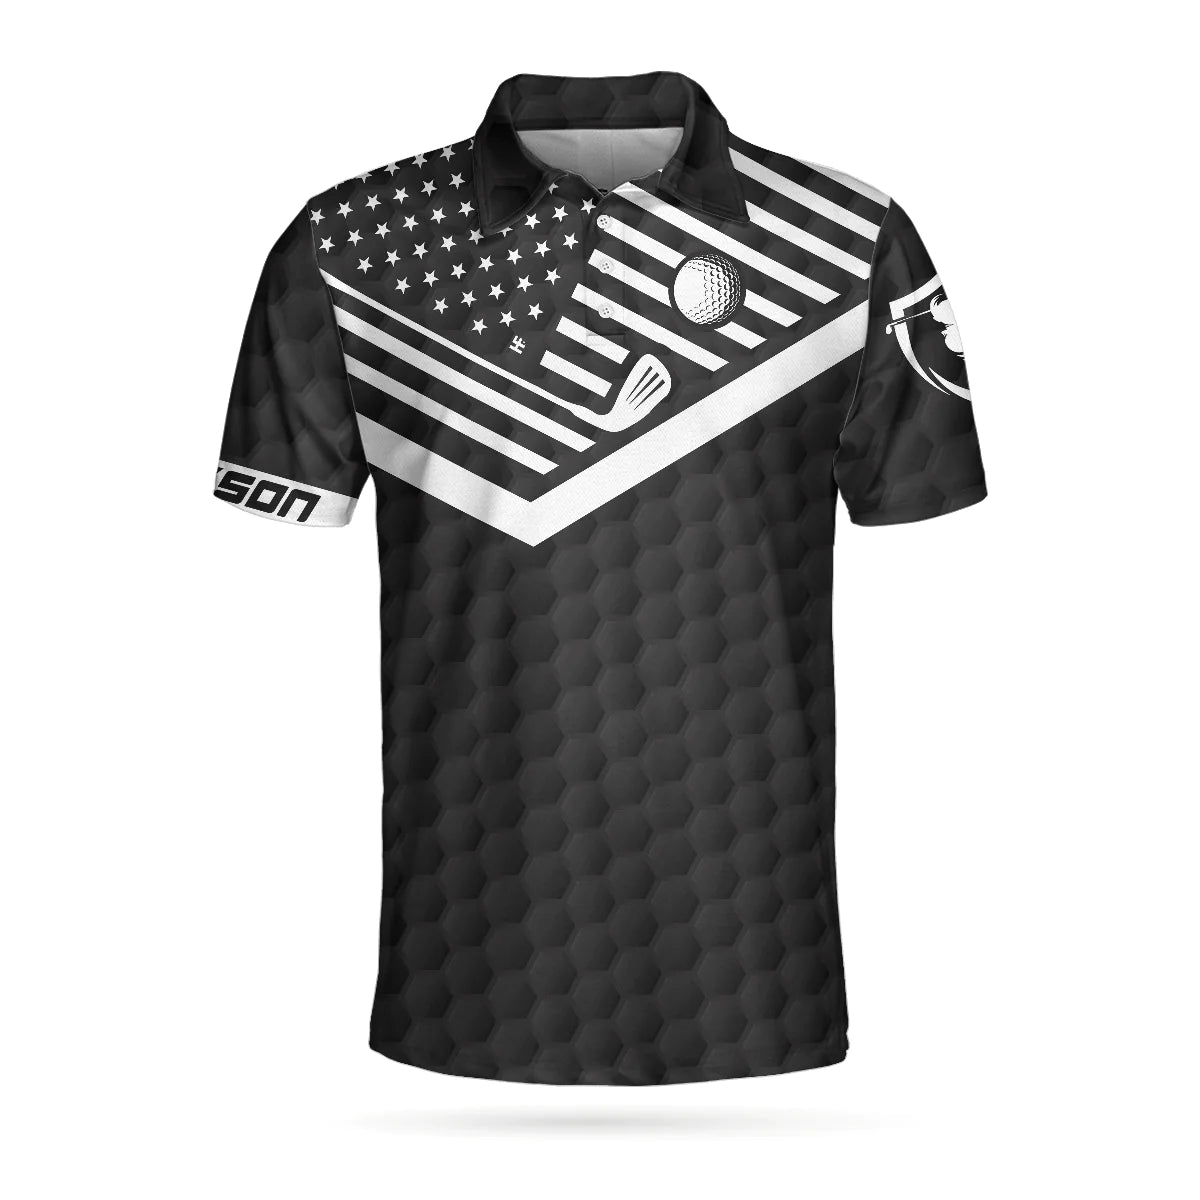 Men’s Golf Polo Shirt with Custom Design Featuring Left Hitting Black American Flag – A Humorous Addition to Your Golfing Attire – GP415